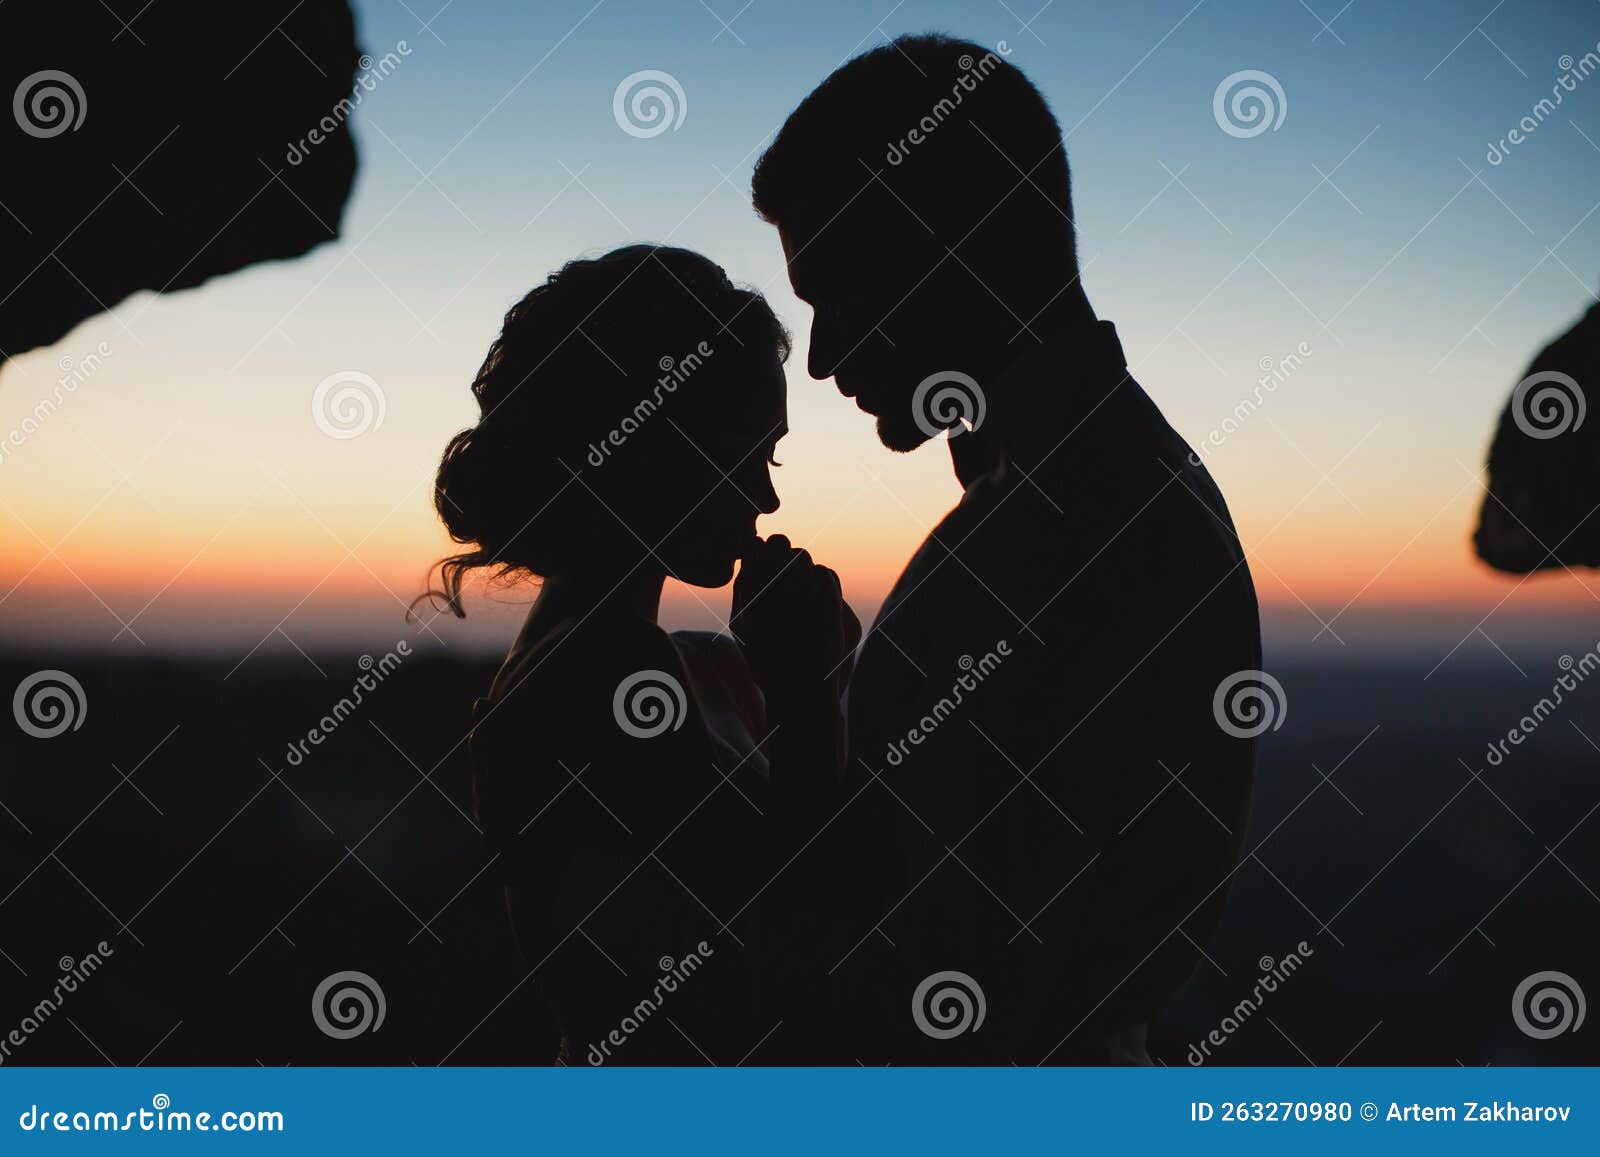 Romantic couple in love embrace in the moonlight Silhouettes of